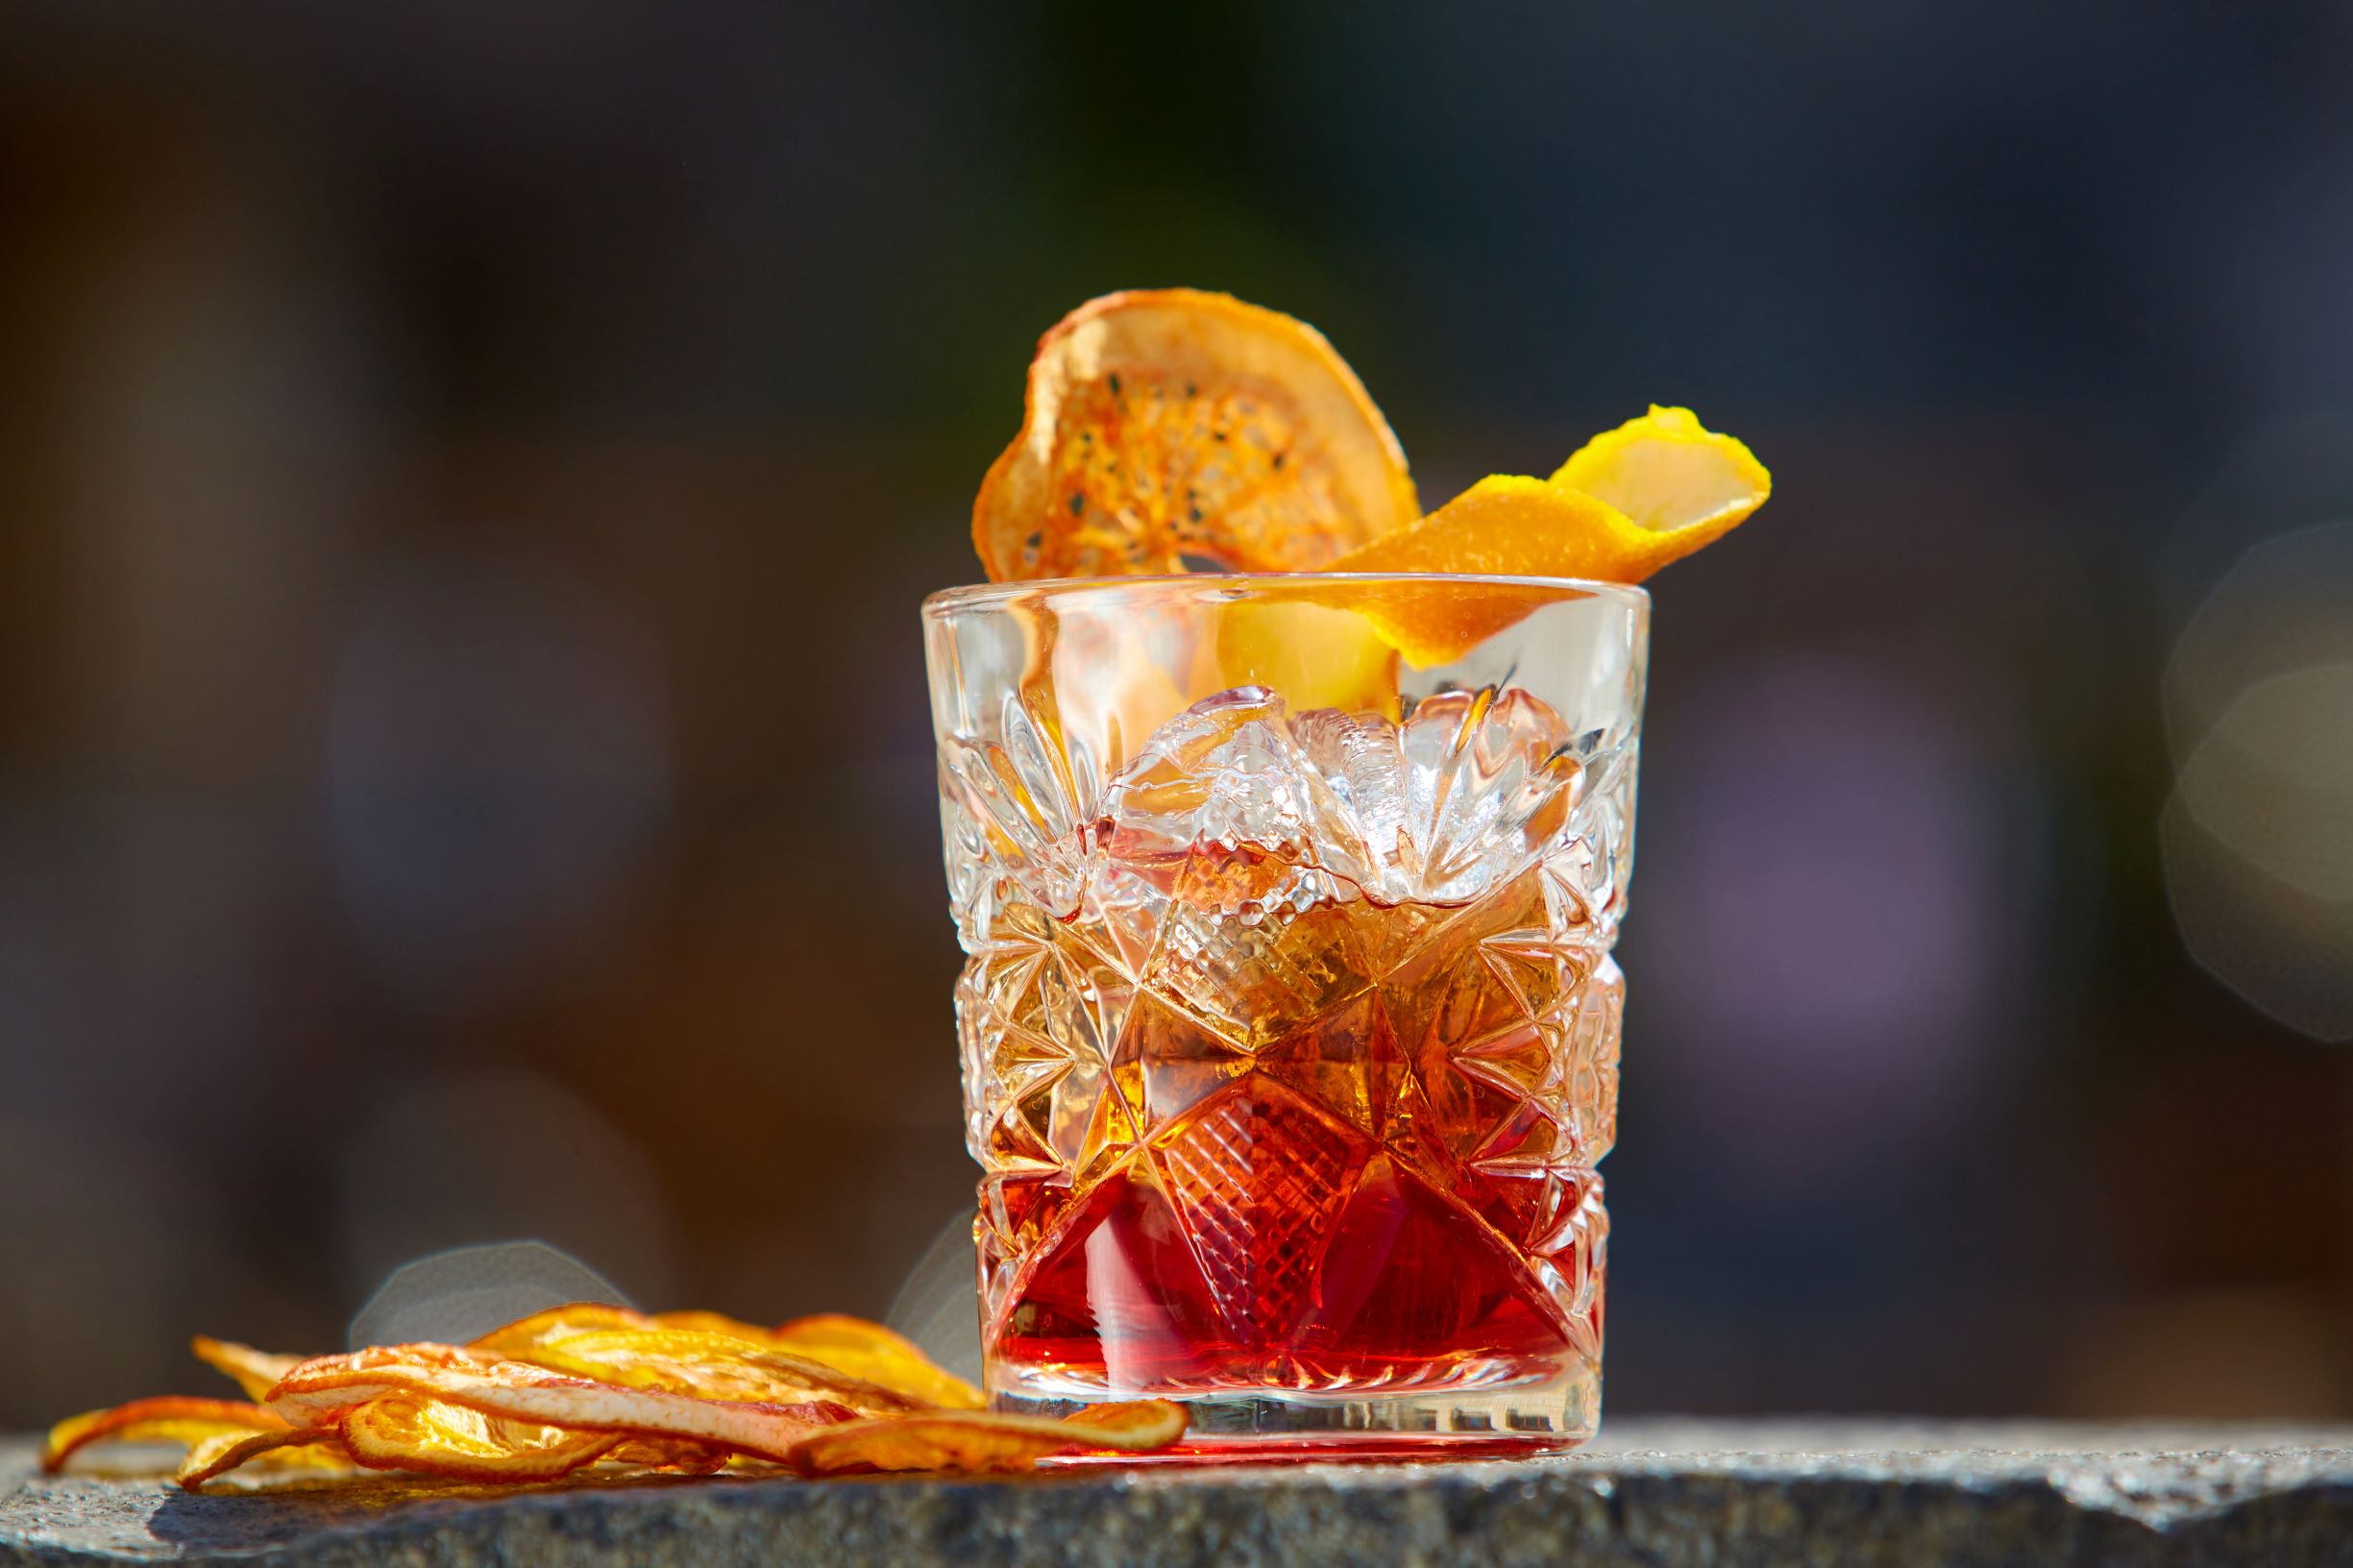 Old fashioned whiskey with an orange peel.